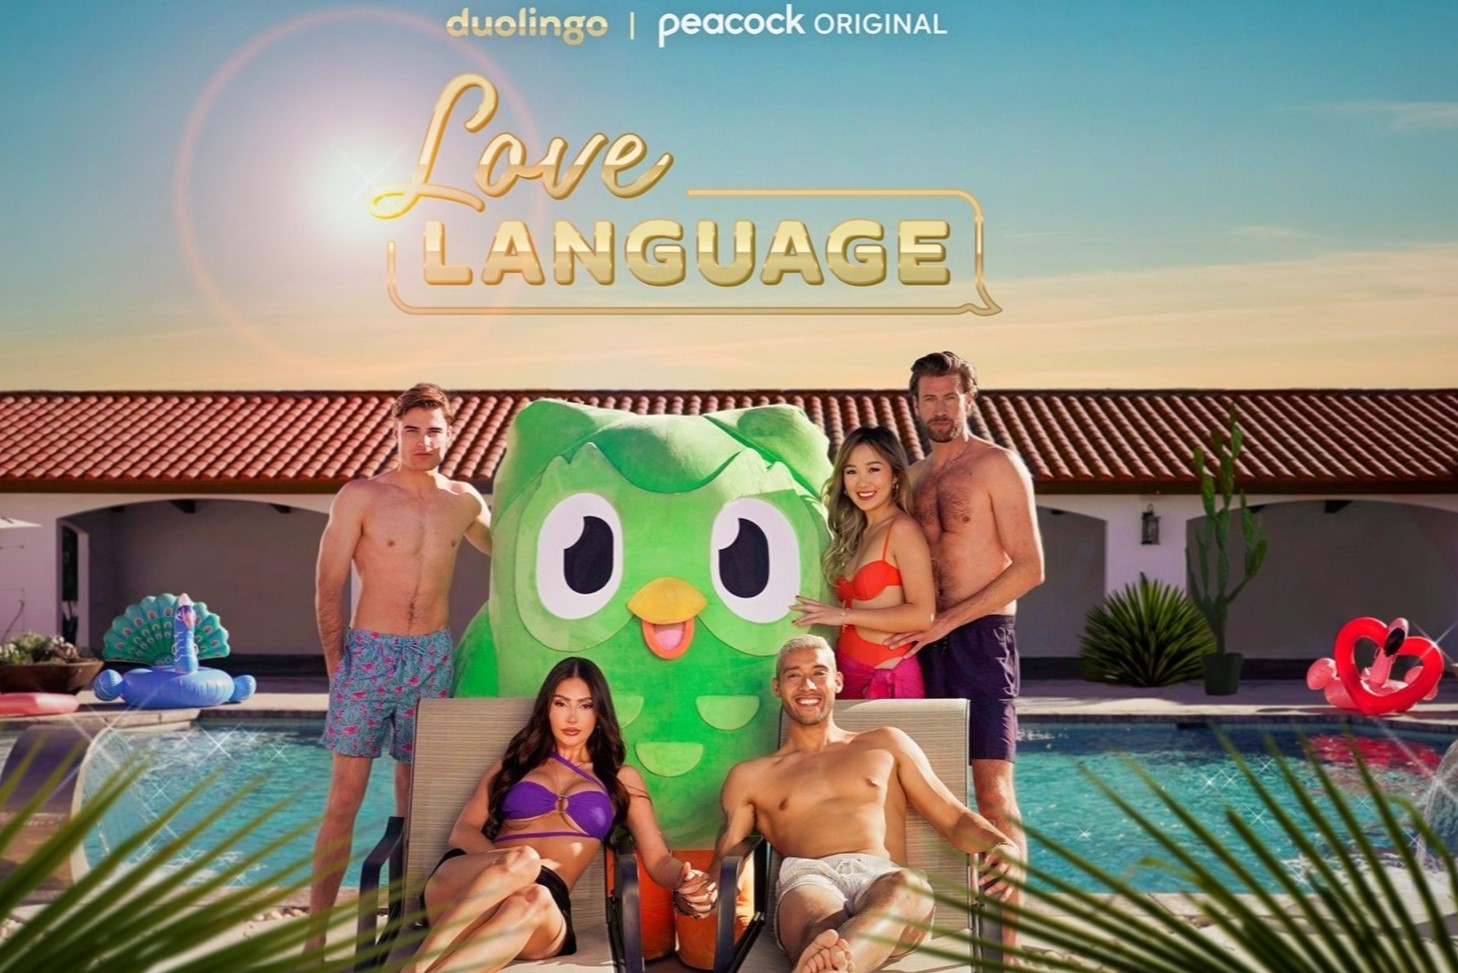 What Cable Television Program Did You Watch On Duolingo?